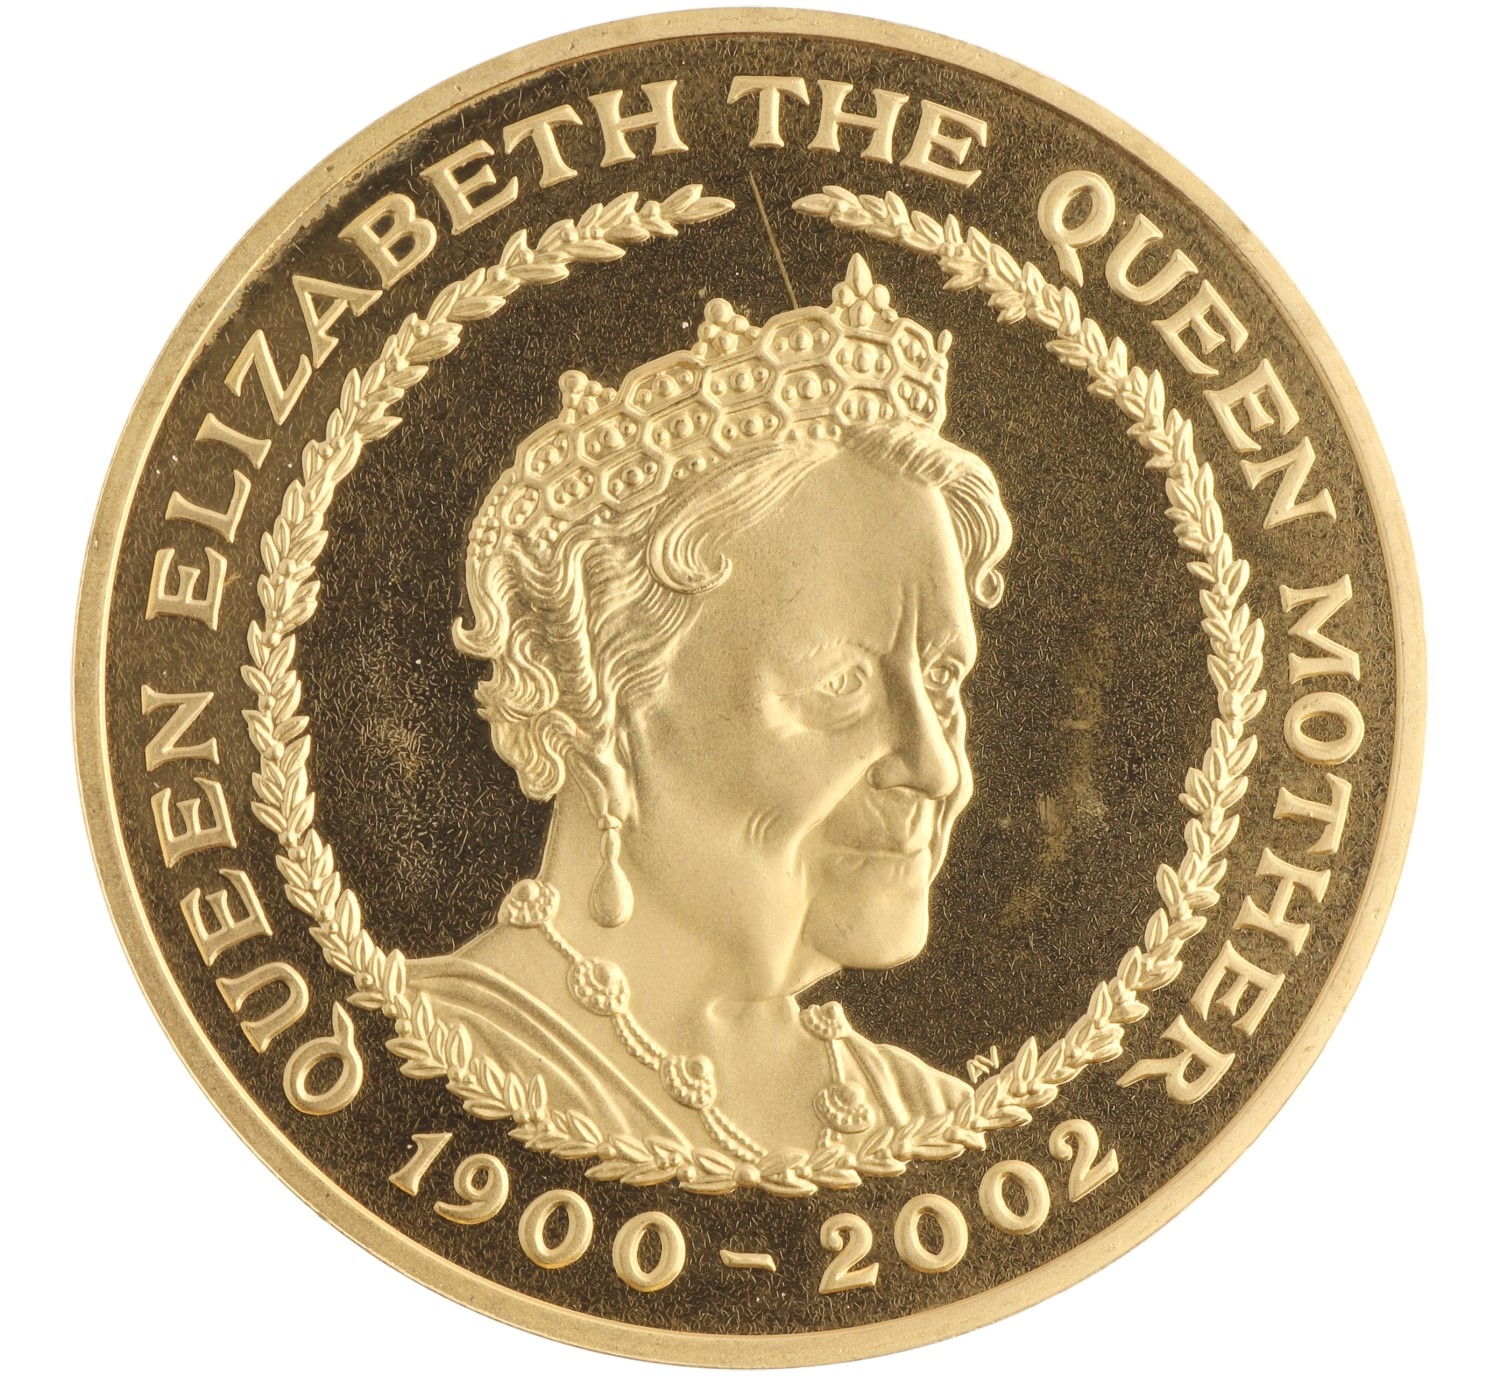 5 Pounds - Great Britain - 2002